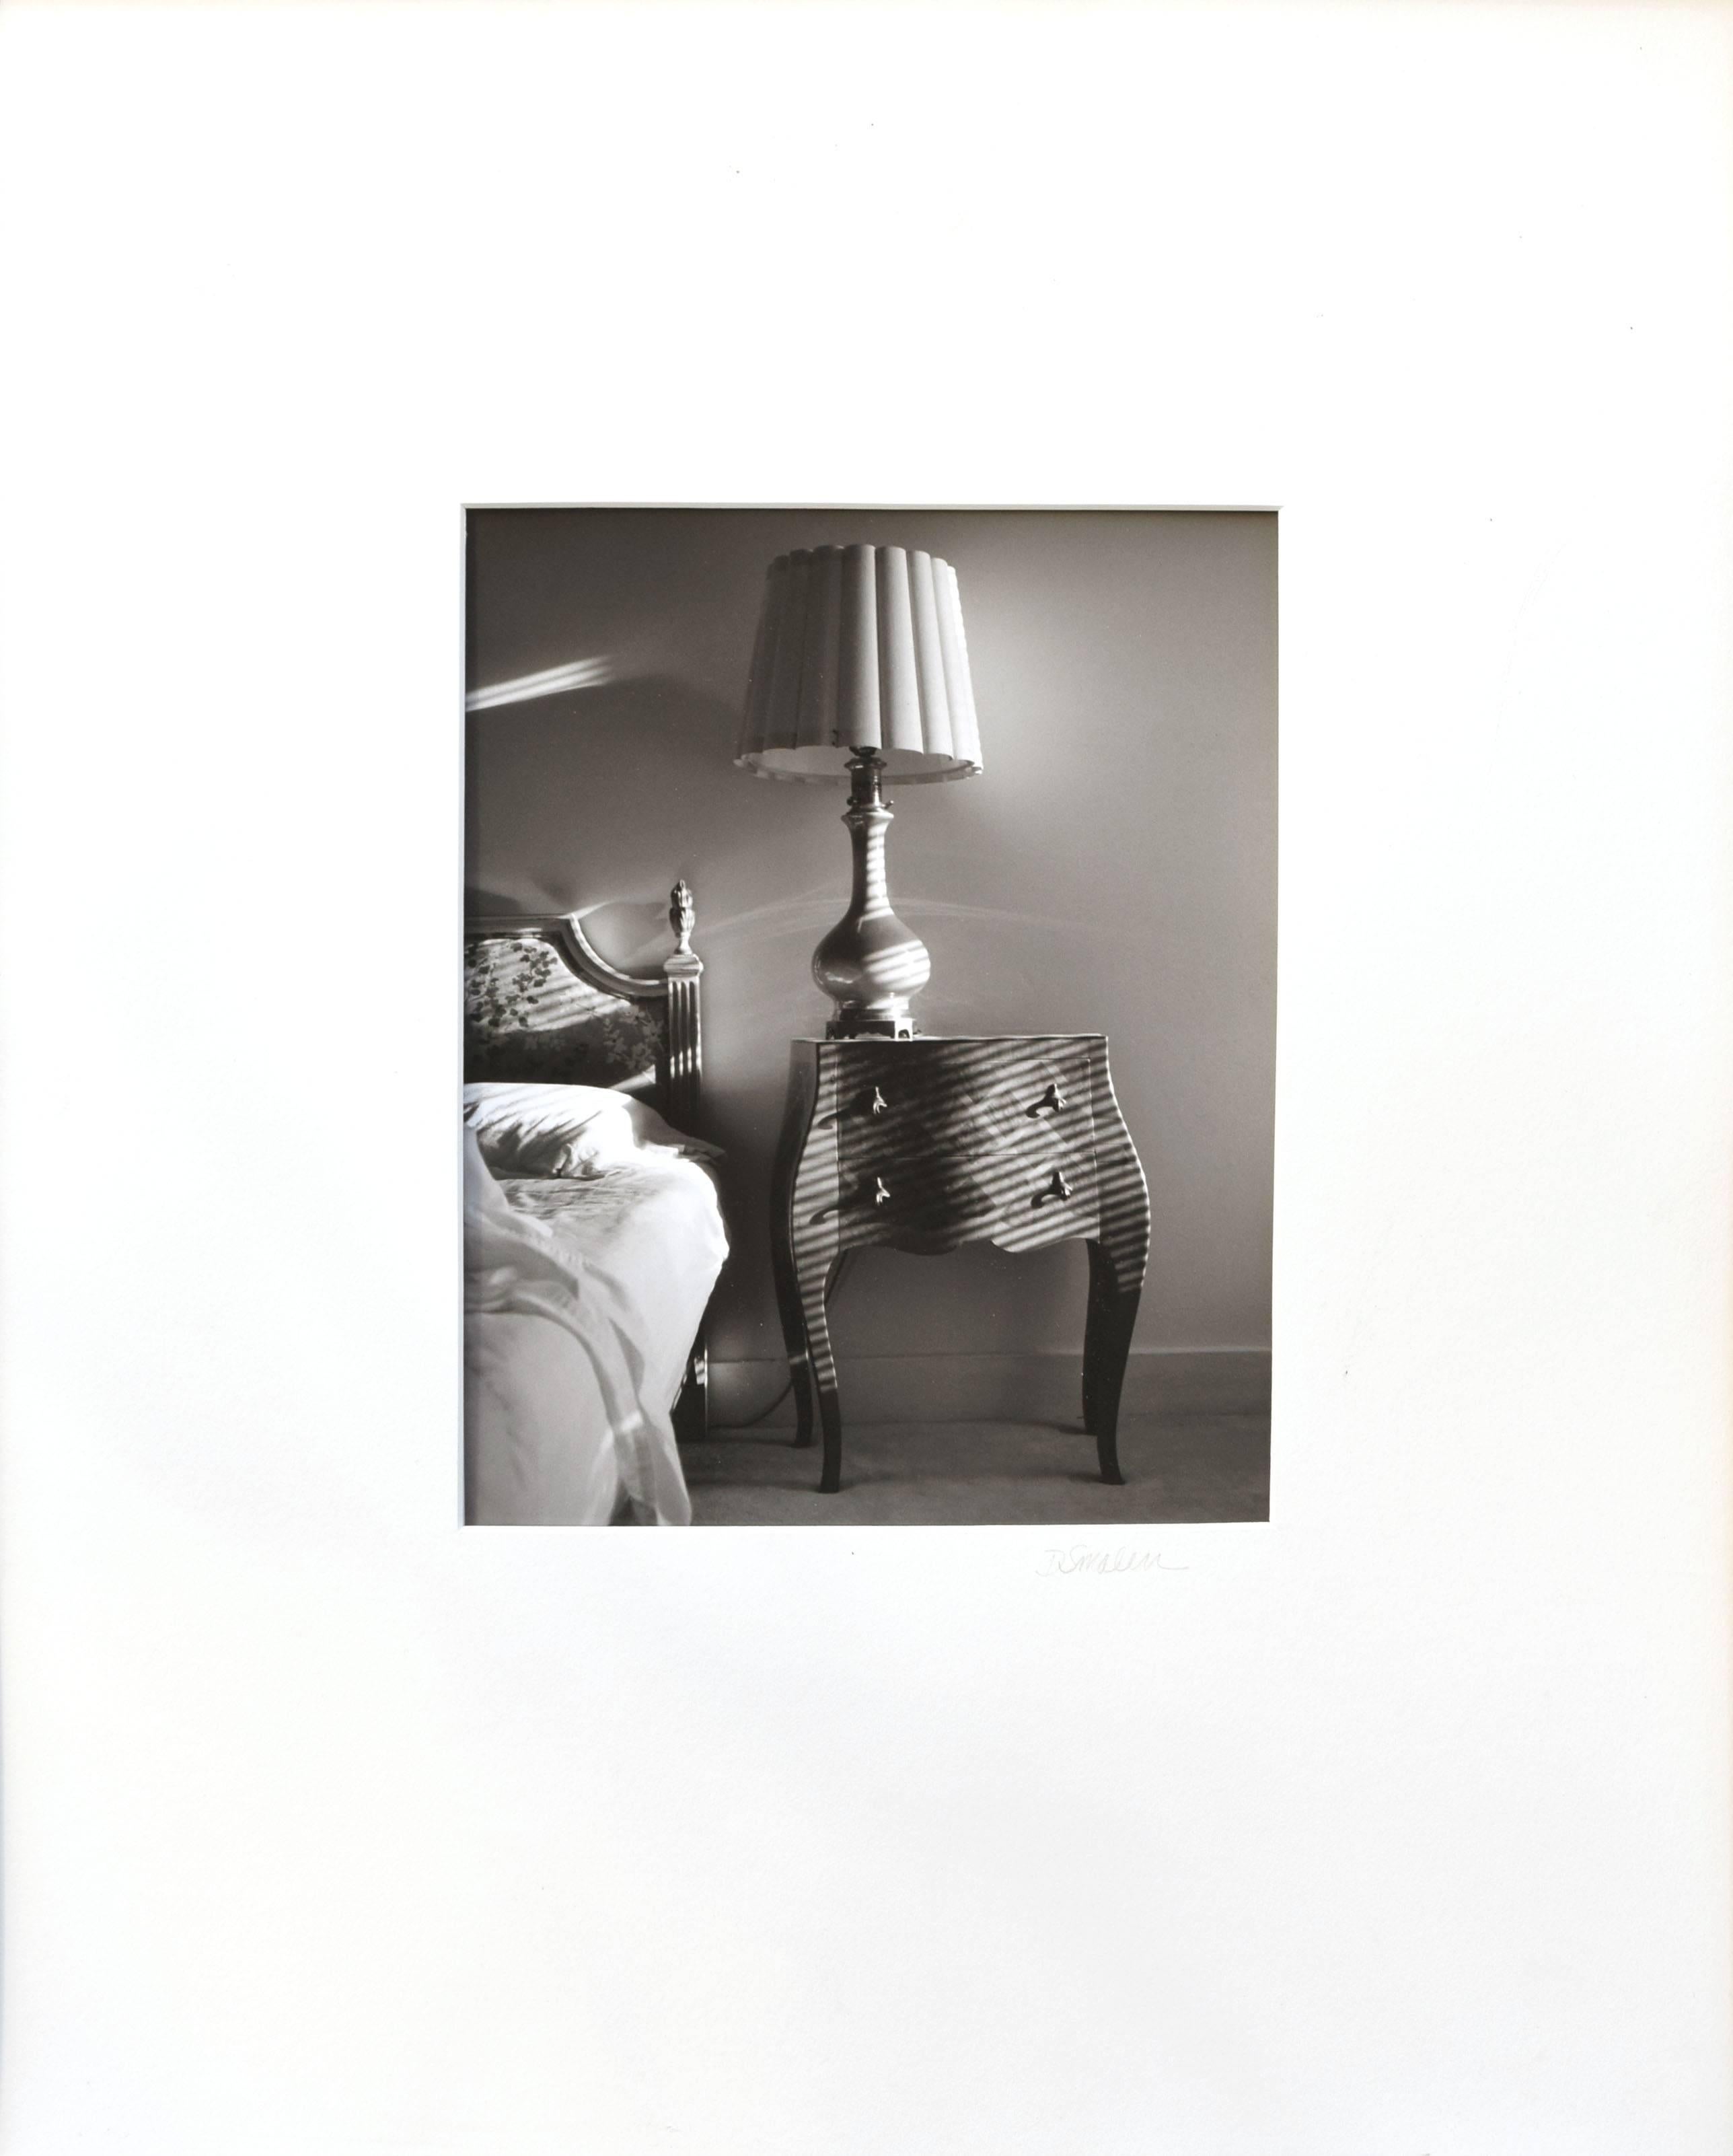 D. Smalen Still-Life Photograph - Table with Lamp - Black & White Bedroom Interior Photograph